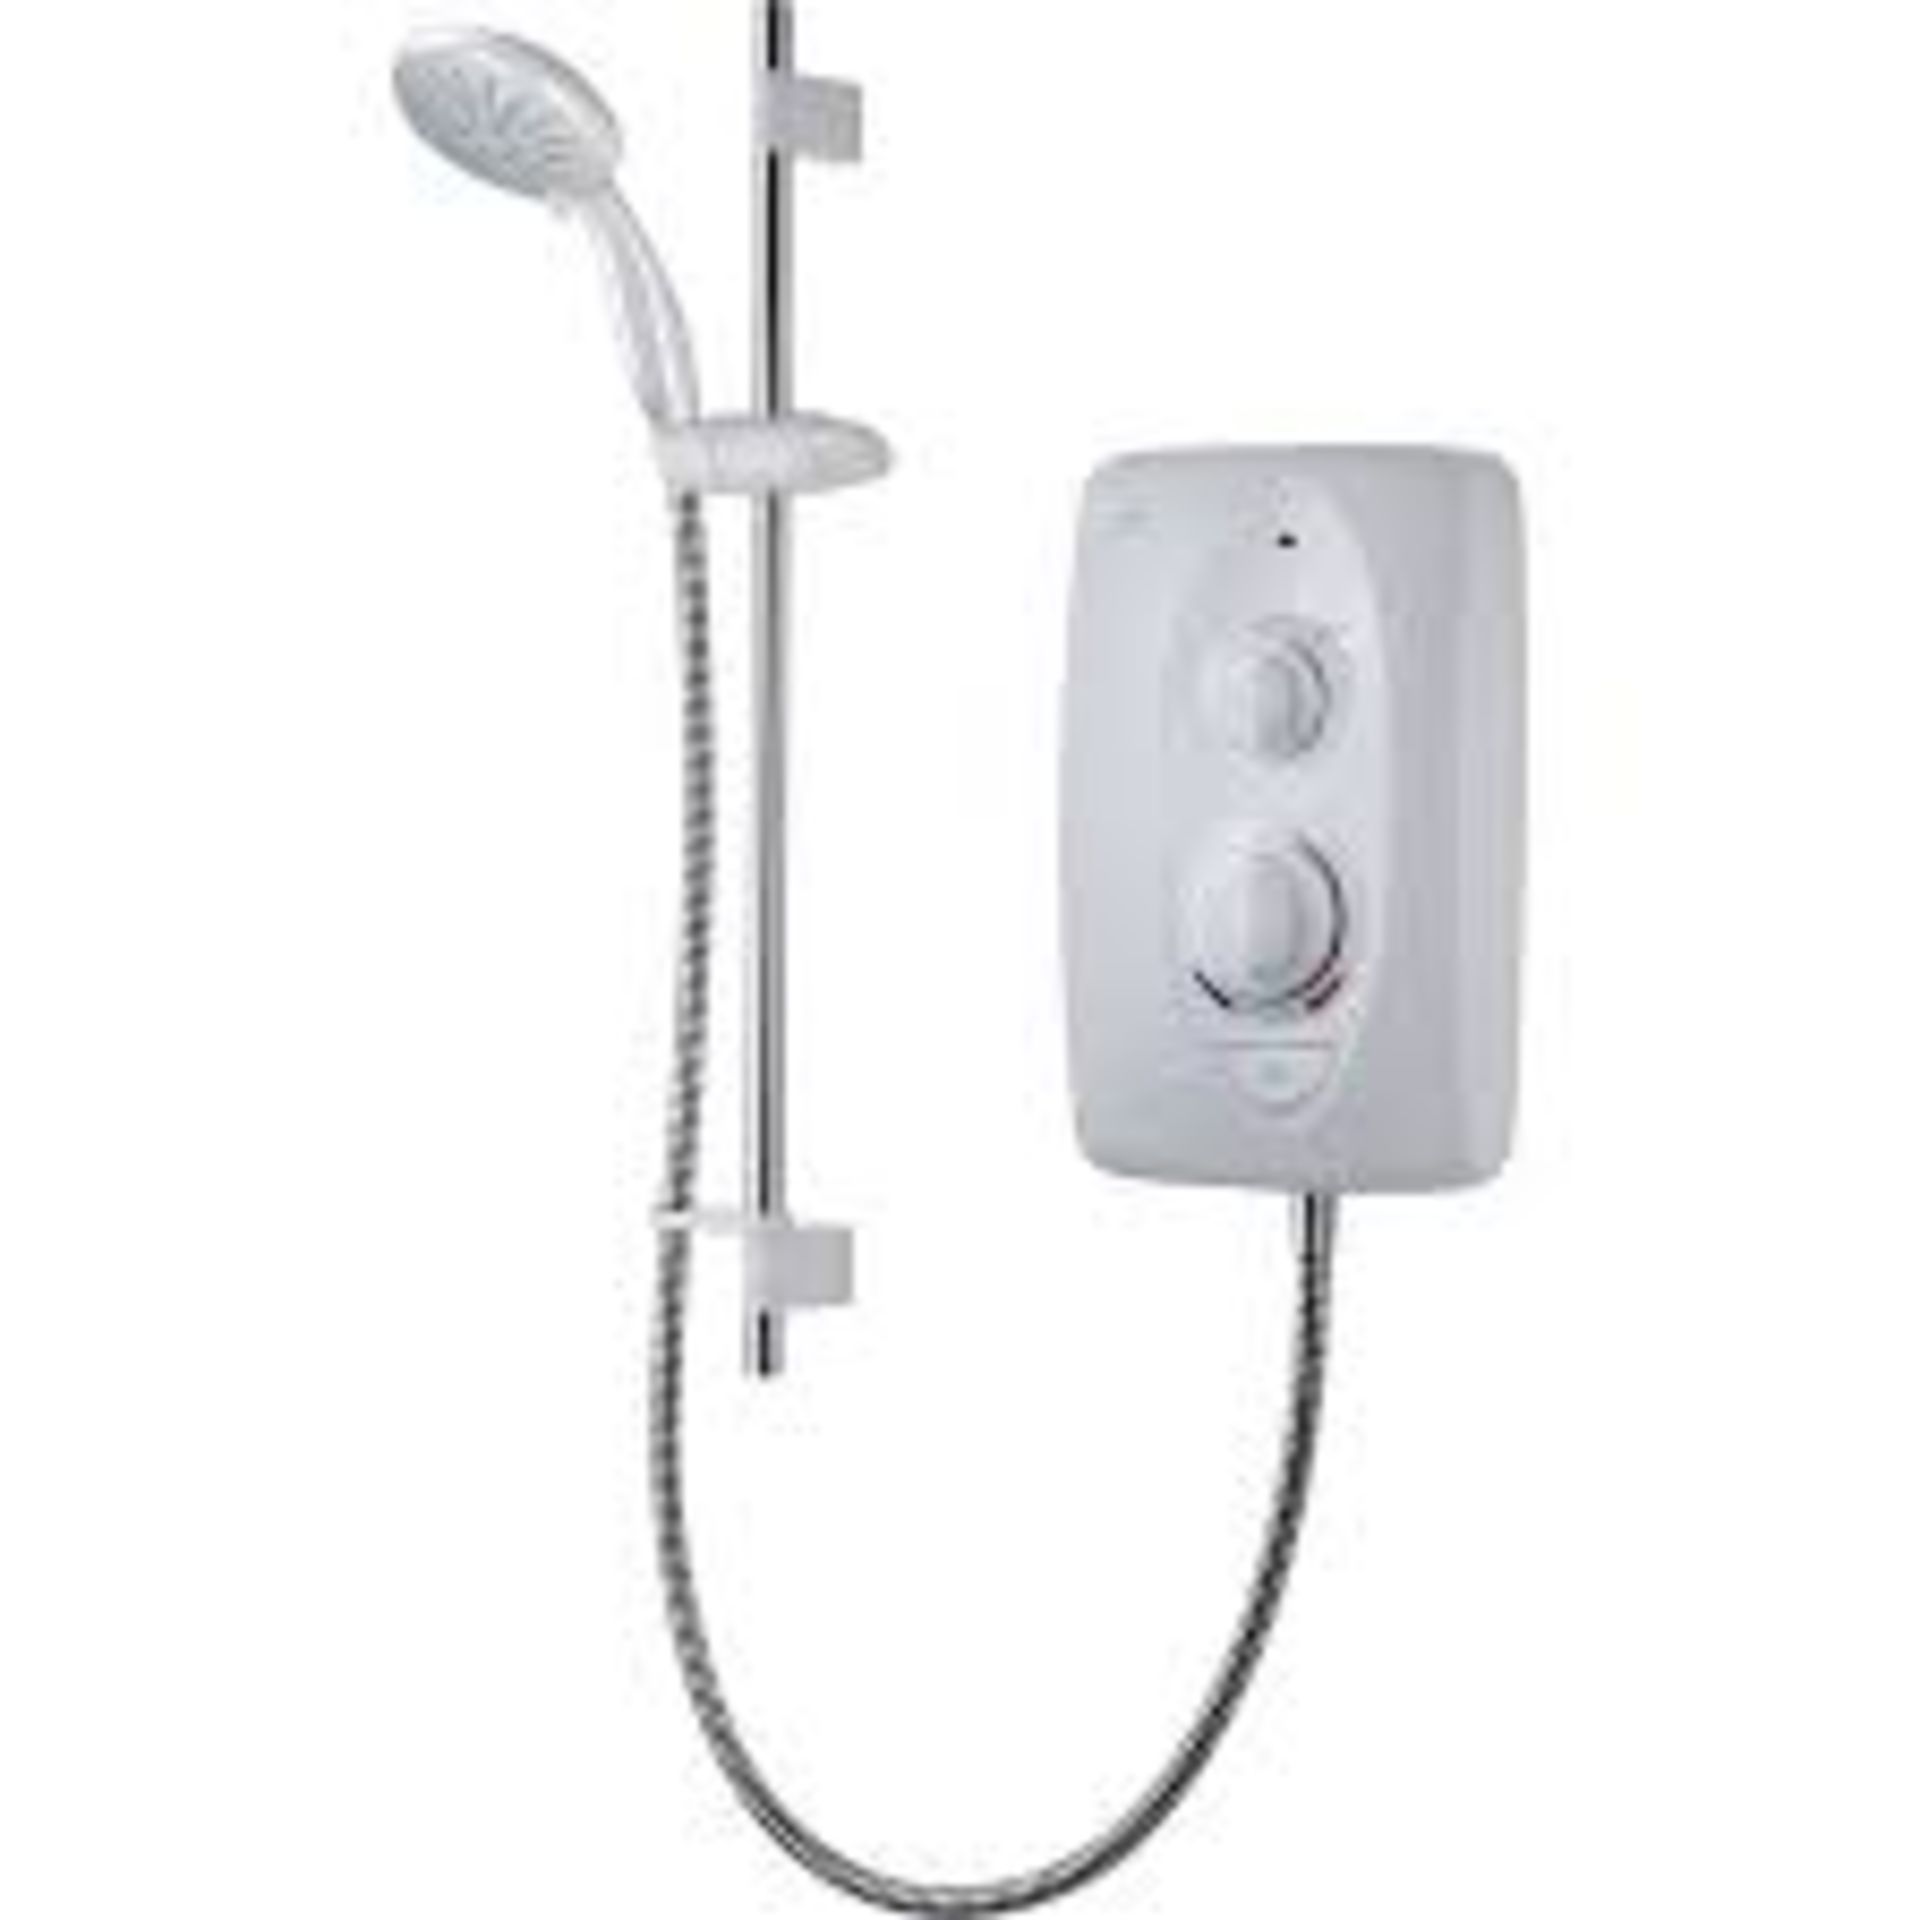 Mira Sprint Multi-Fit Electric Shower 8.5kw. - S2.12.